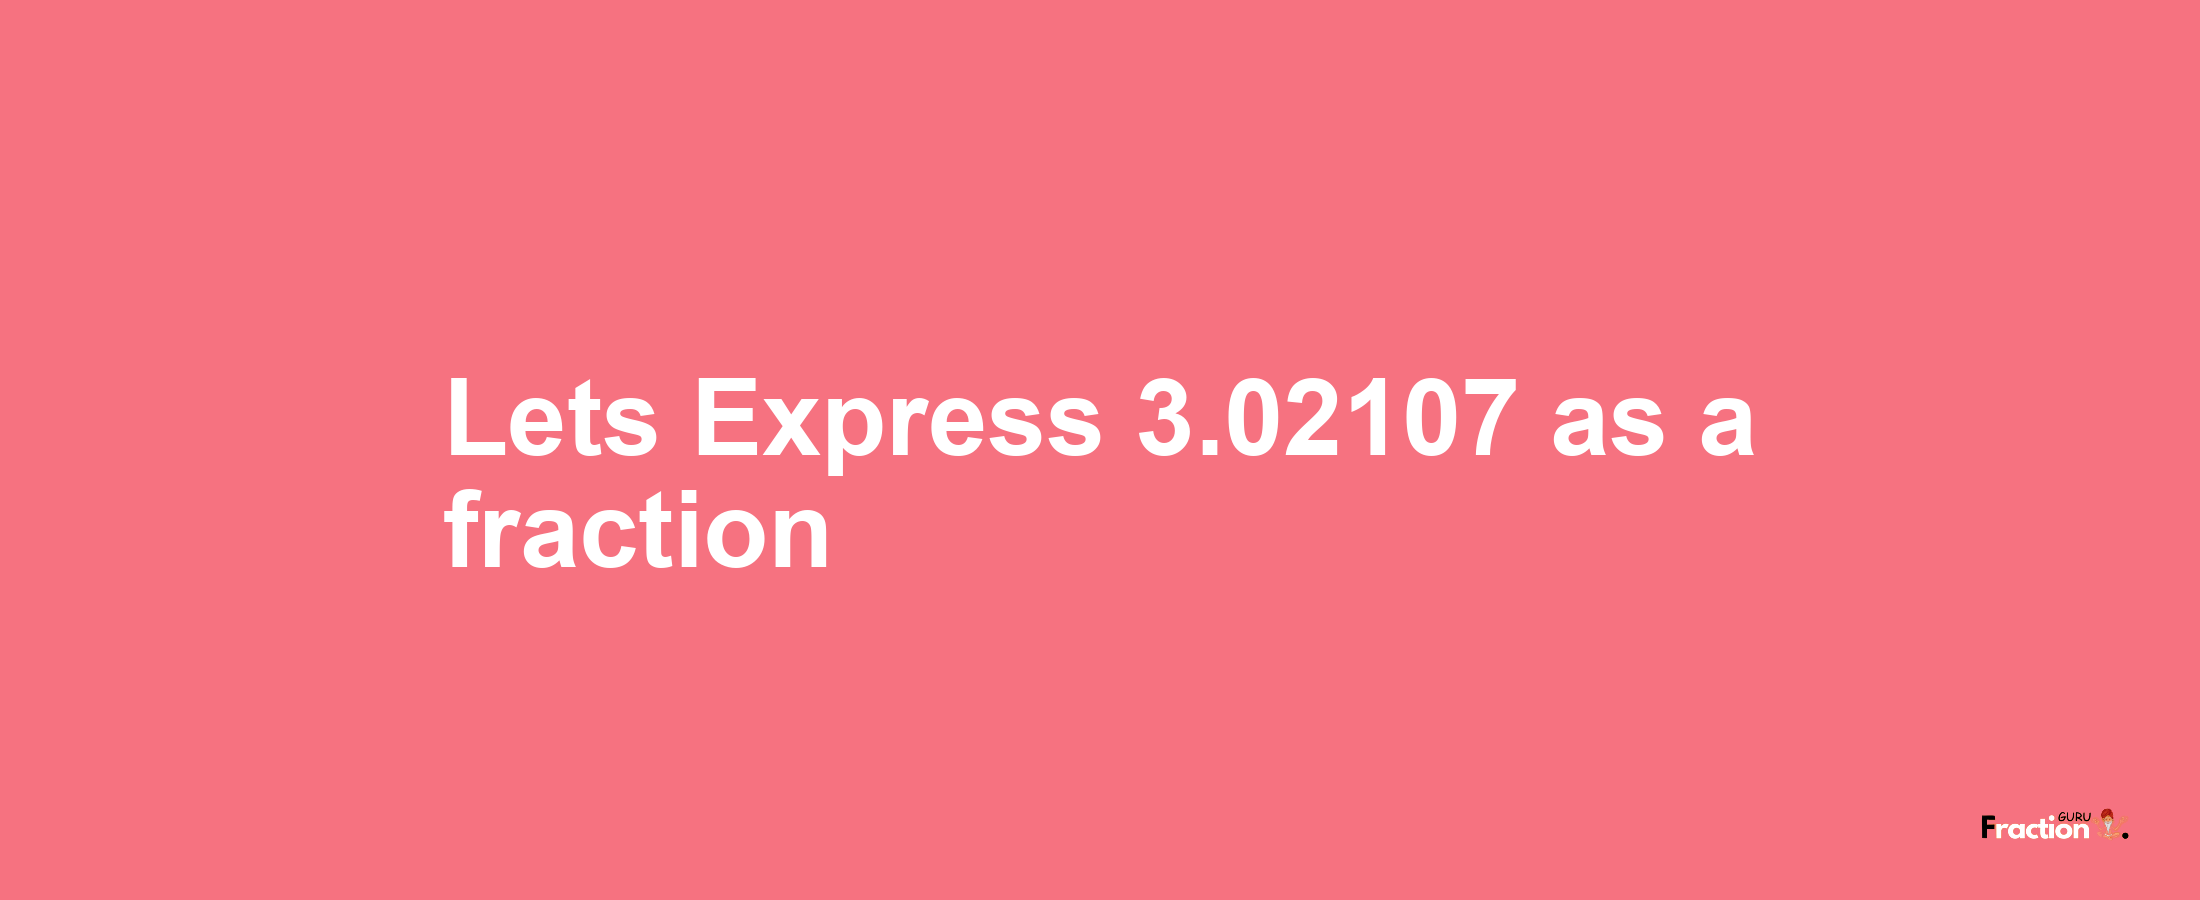 Lets Express 3.02107 as afraction